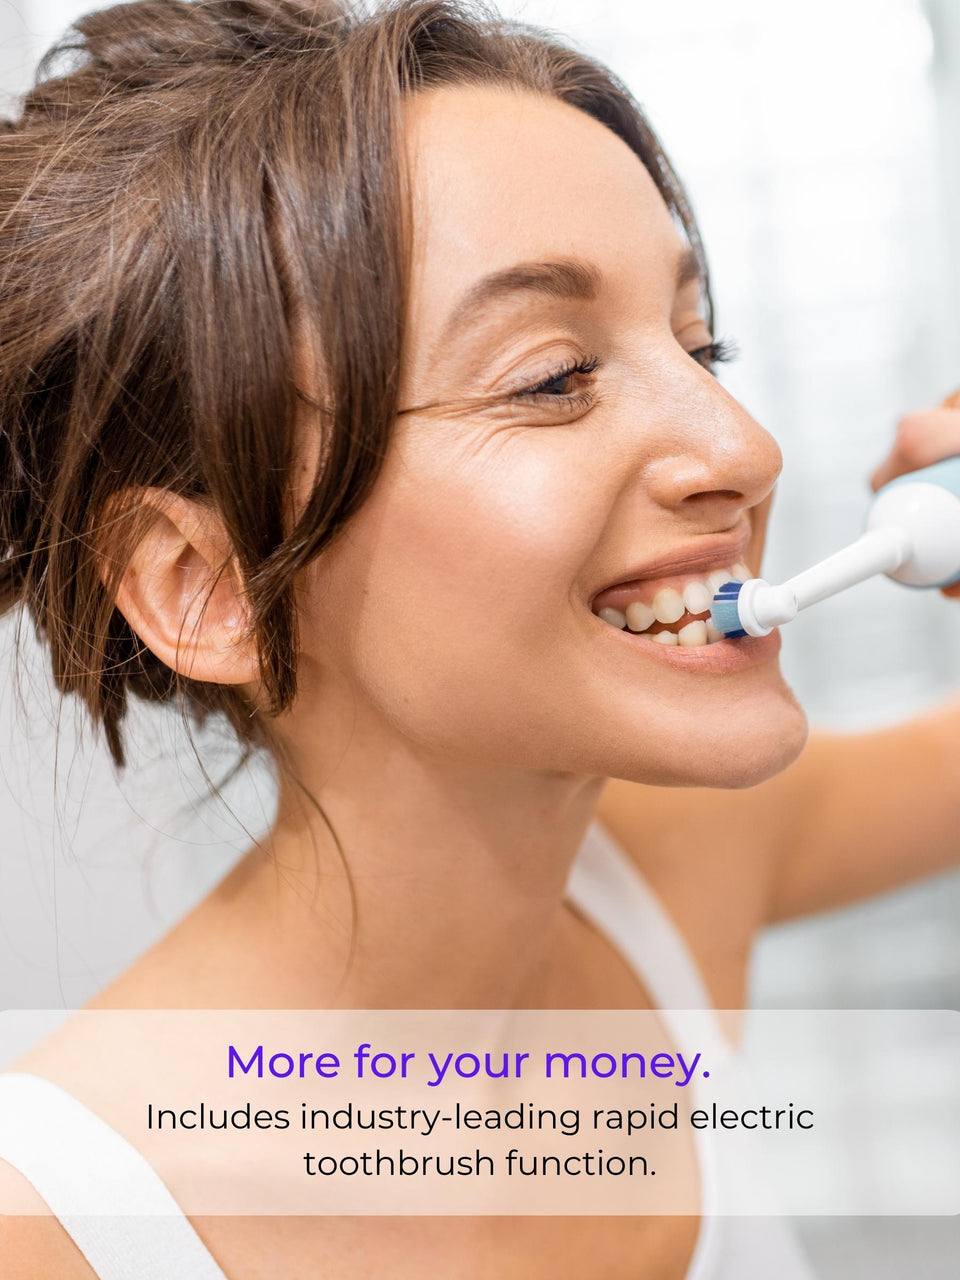  best value for customers are WhiteWaveSmile world's best home dental products